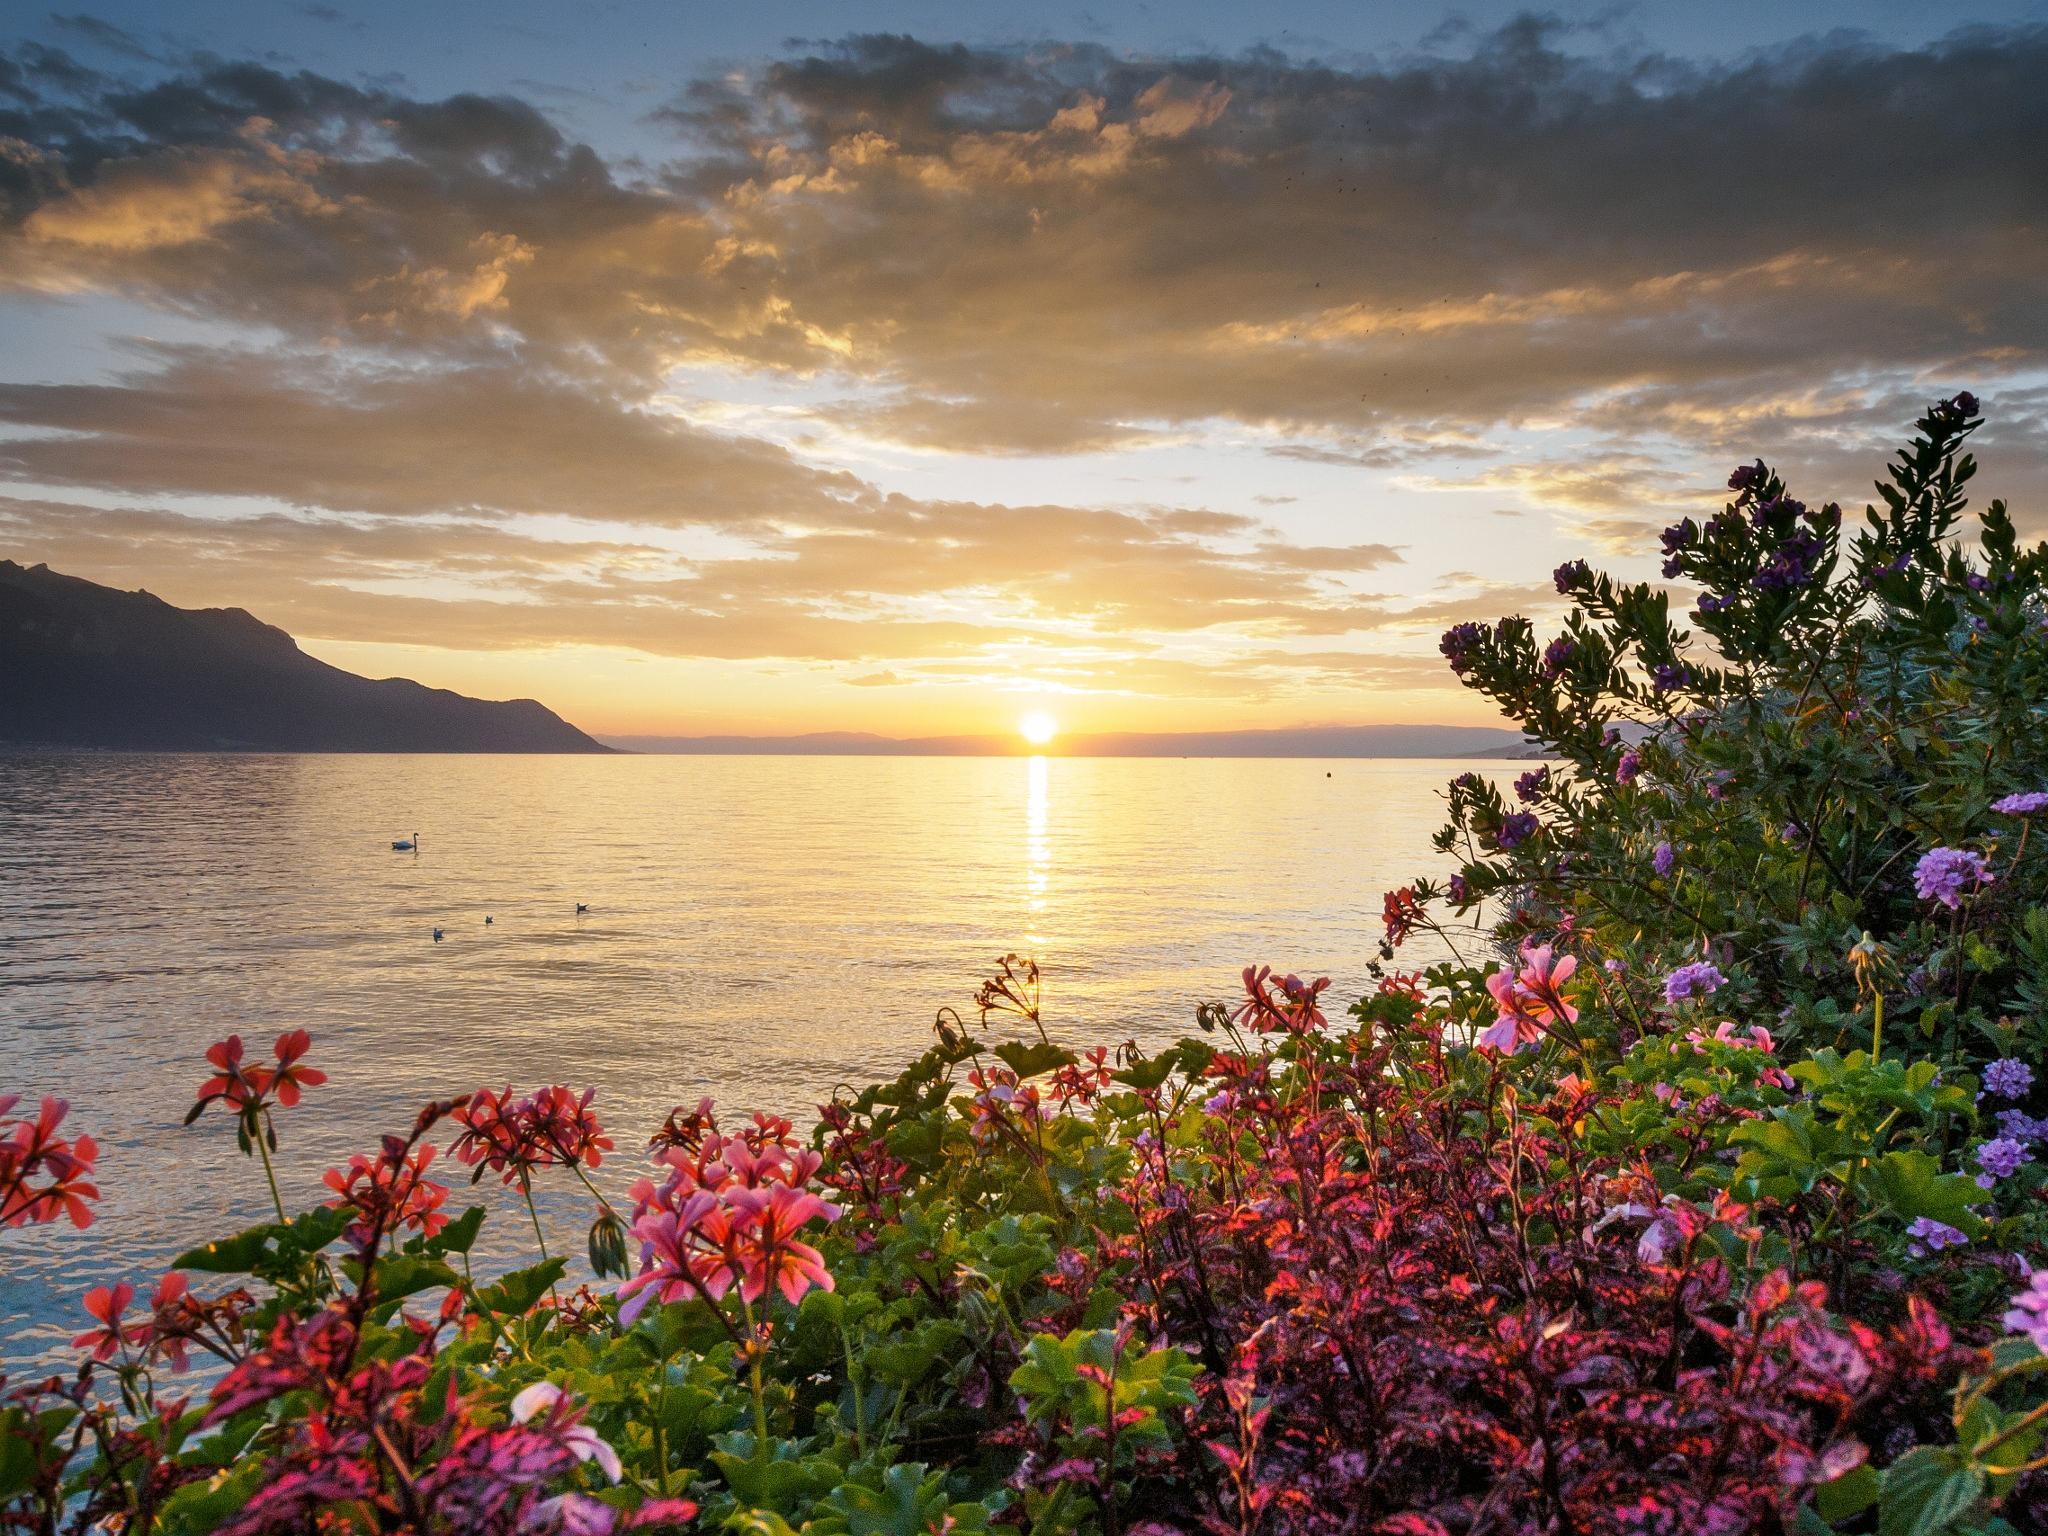 clouds, Montreux, flowers, sunset, hills, lake, France